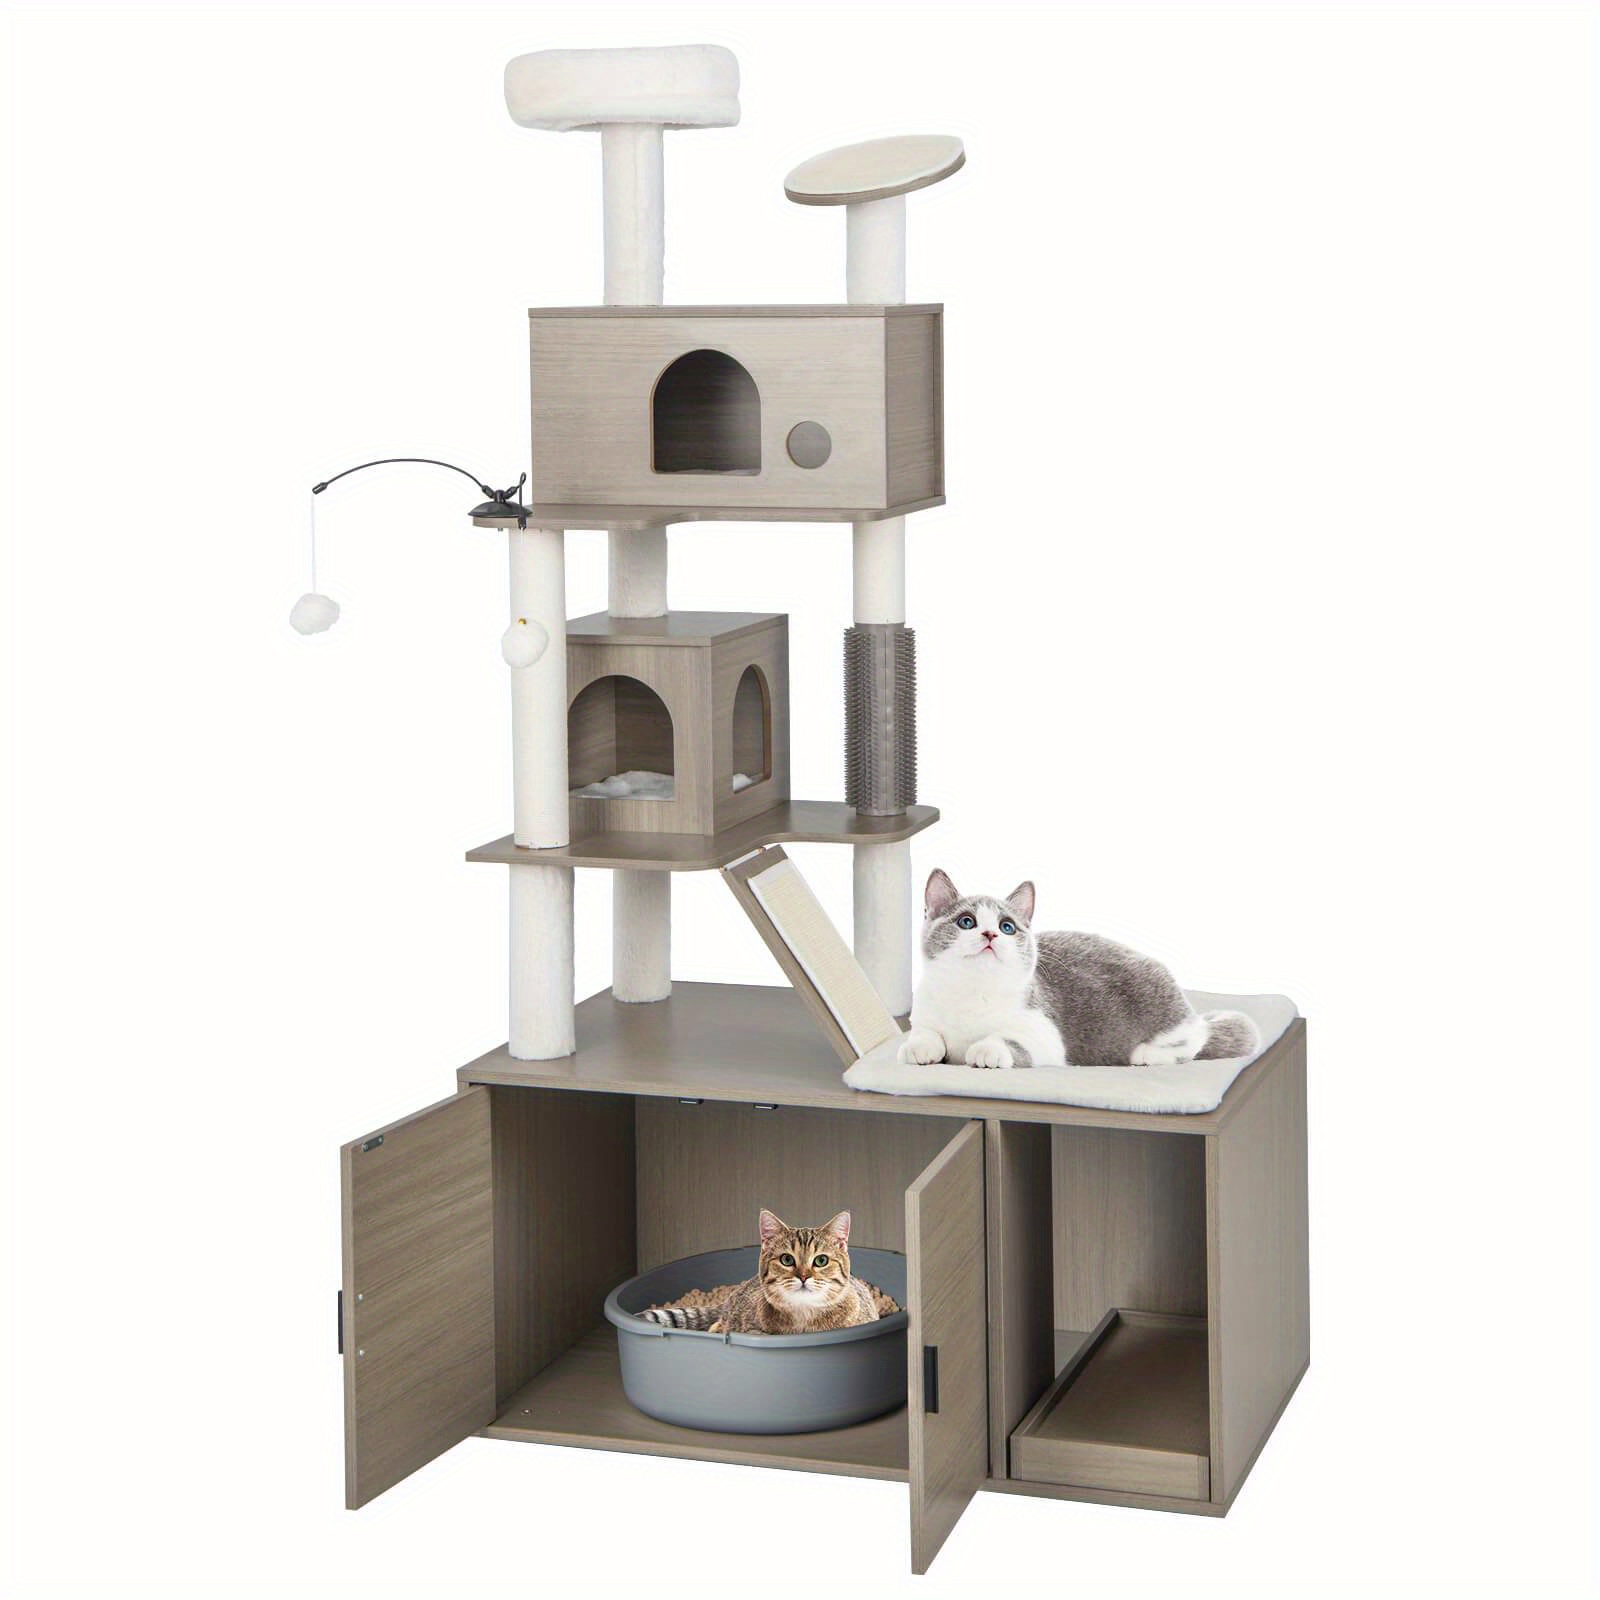 

Lifezeal Cat Tree With Litter Box Enclosure 2-in-1 Modern Cat Tower With Double Condos